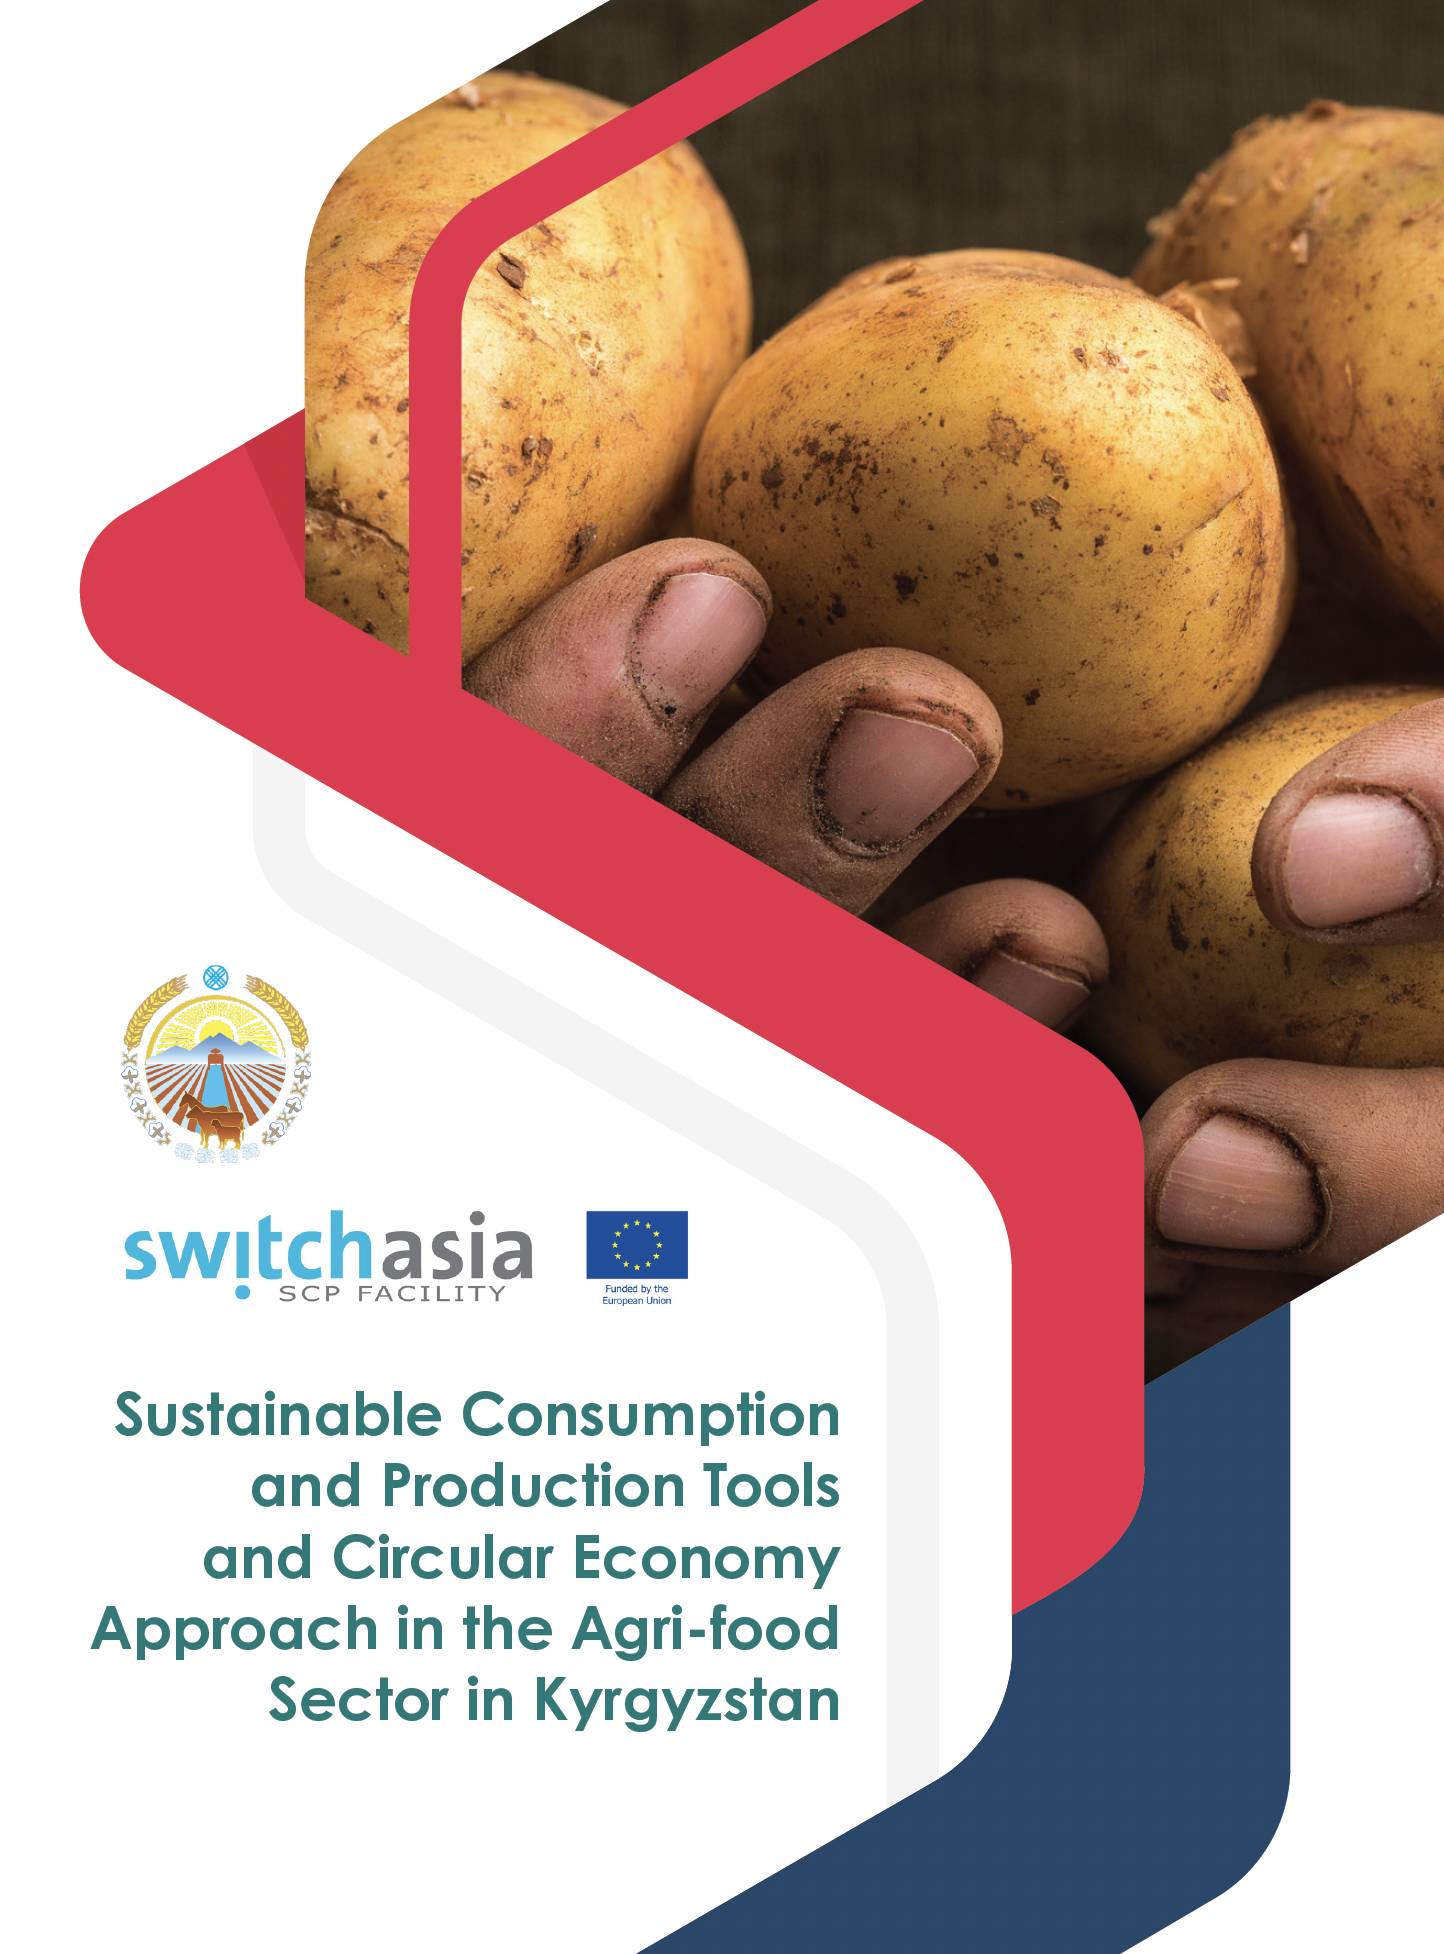 Sustainable Consumption and Production Tools and Circular Economy Approach in the Agri-food Sector in Kyrgyzstan